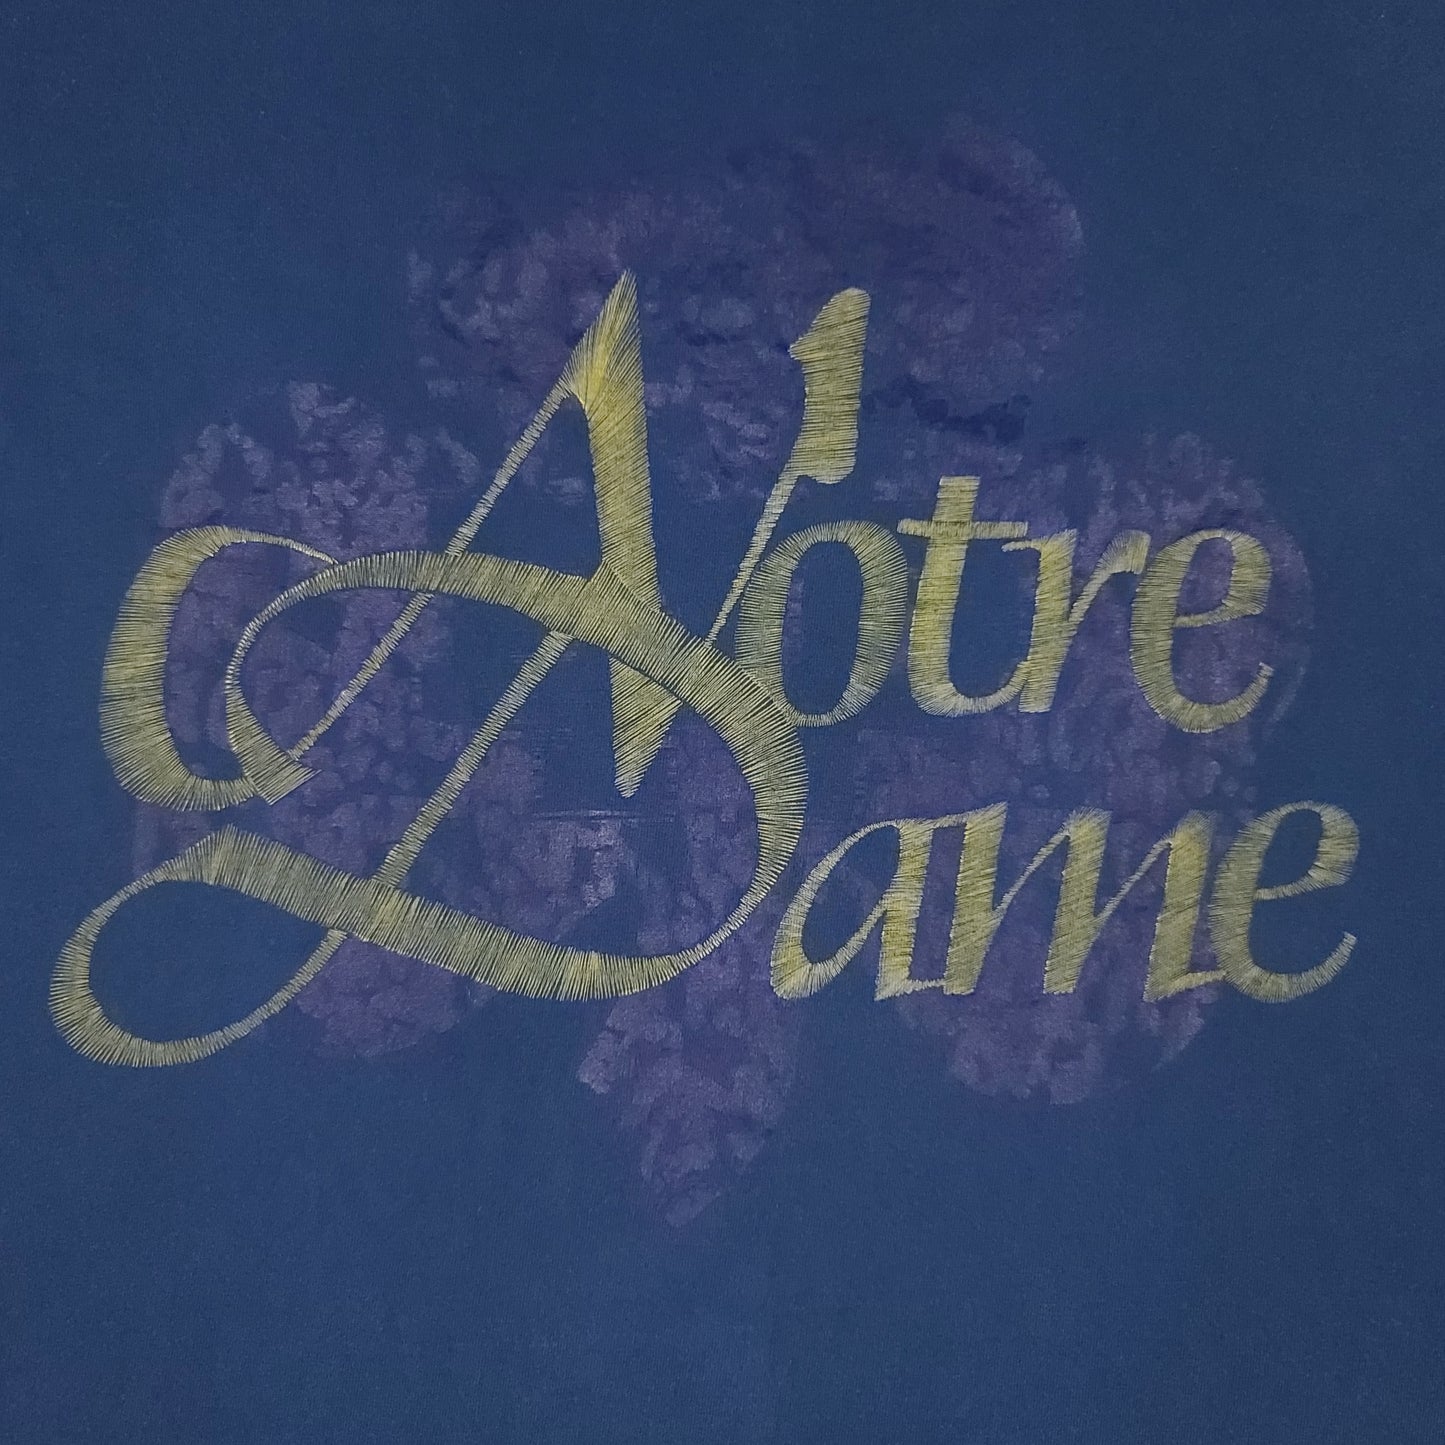 Vintage University of Notre Dame The Game Navy Blue Tee